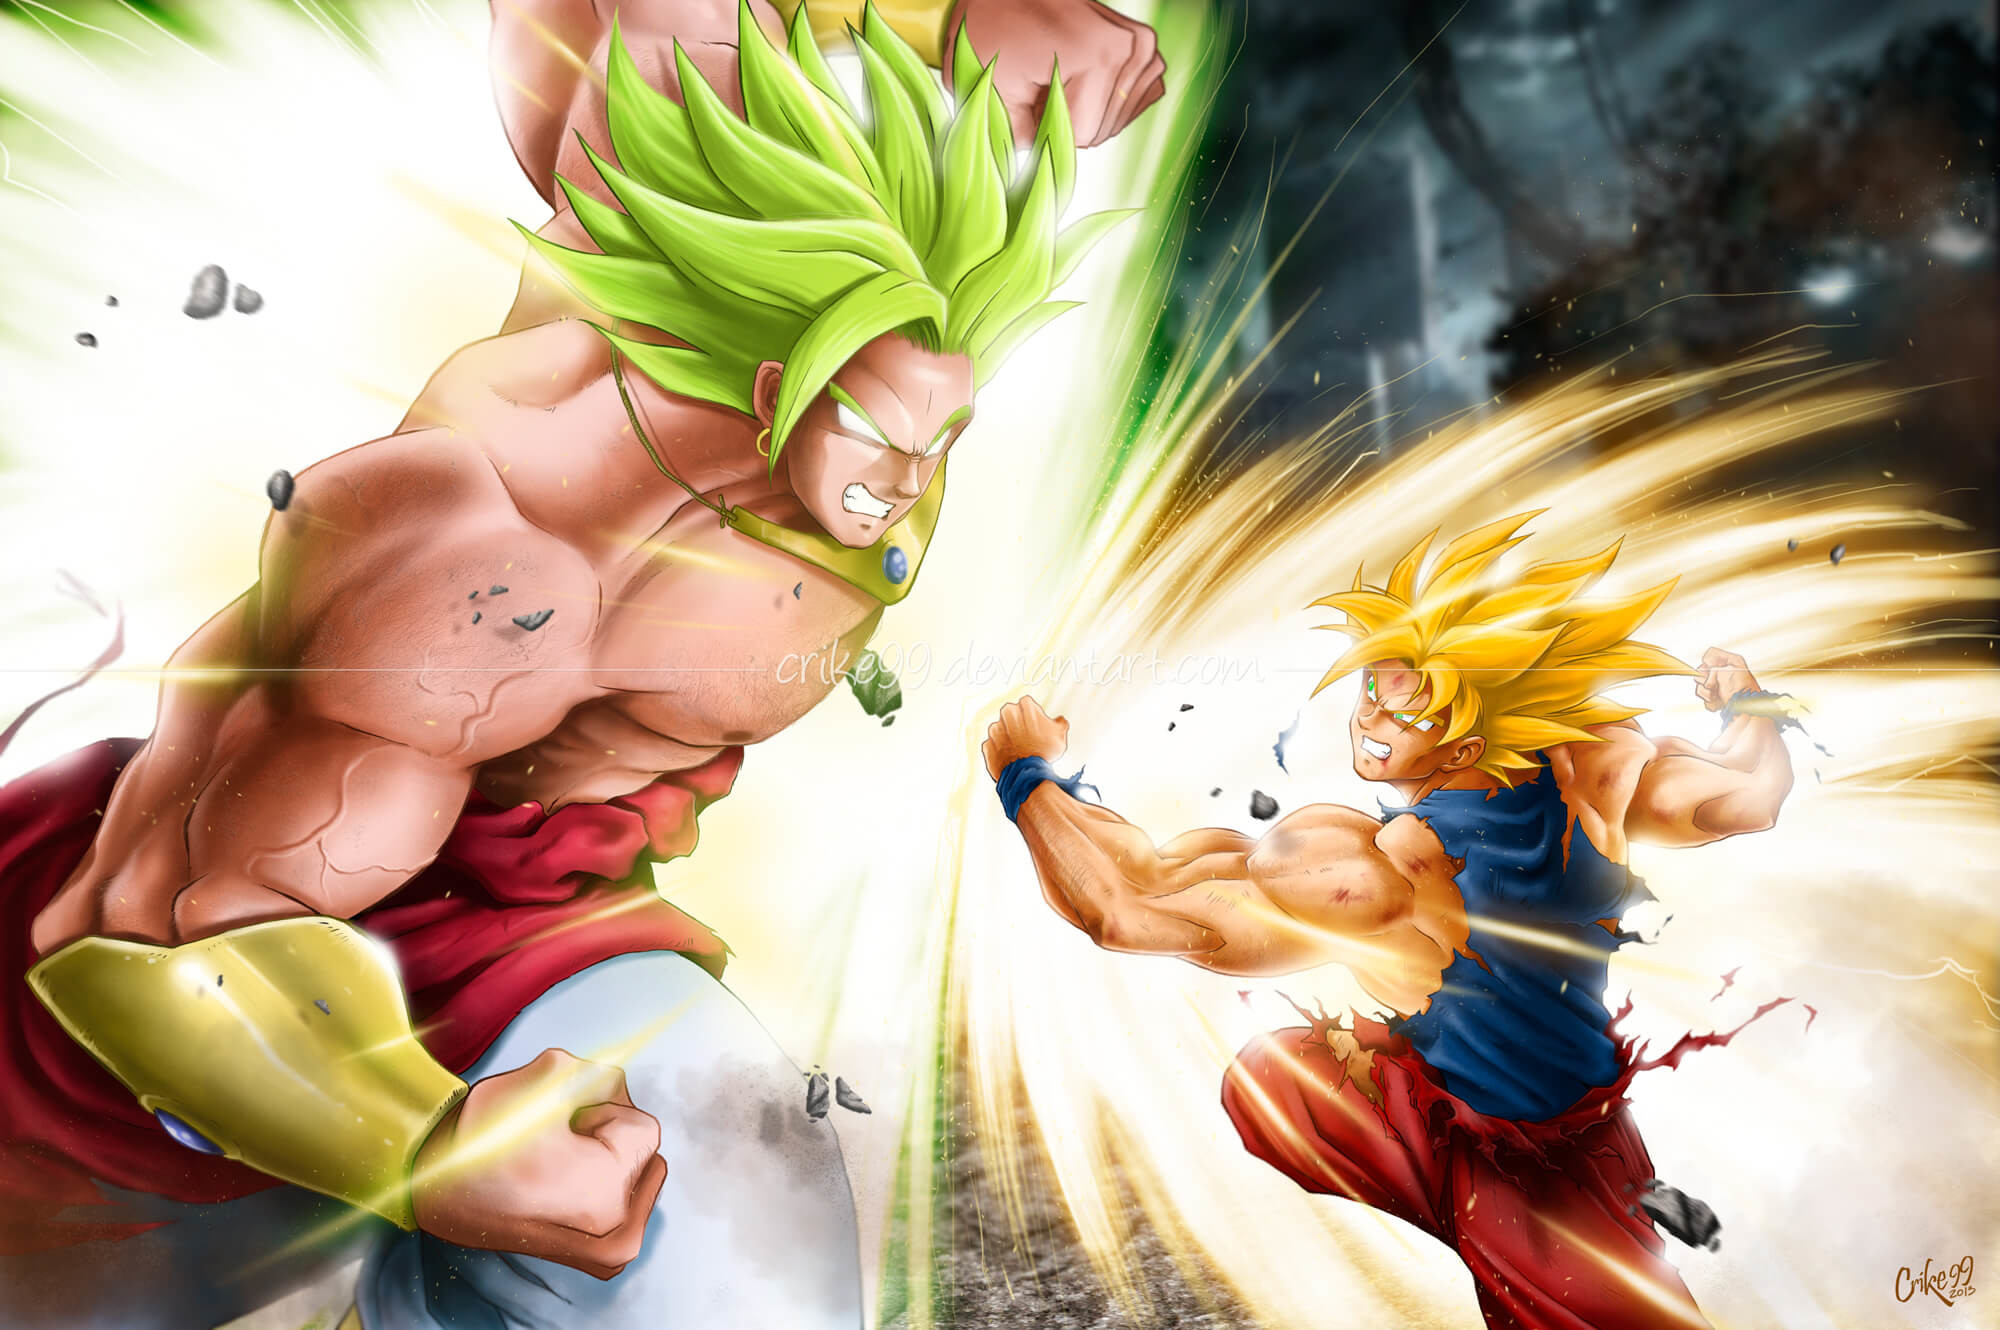 2000x1330 Goku Vs Broly Wallpapers in Best  px Resolutions.  0.249  MB